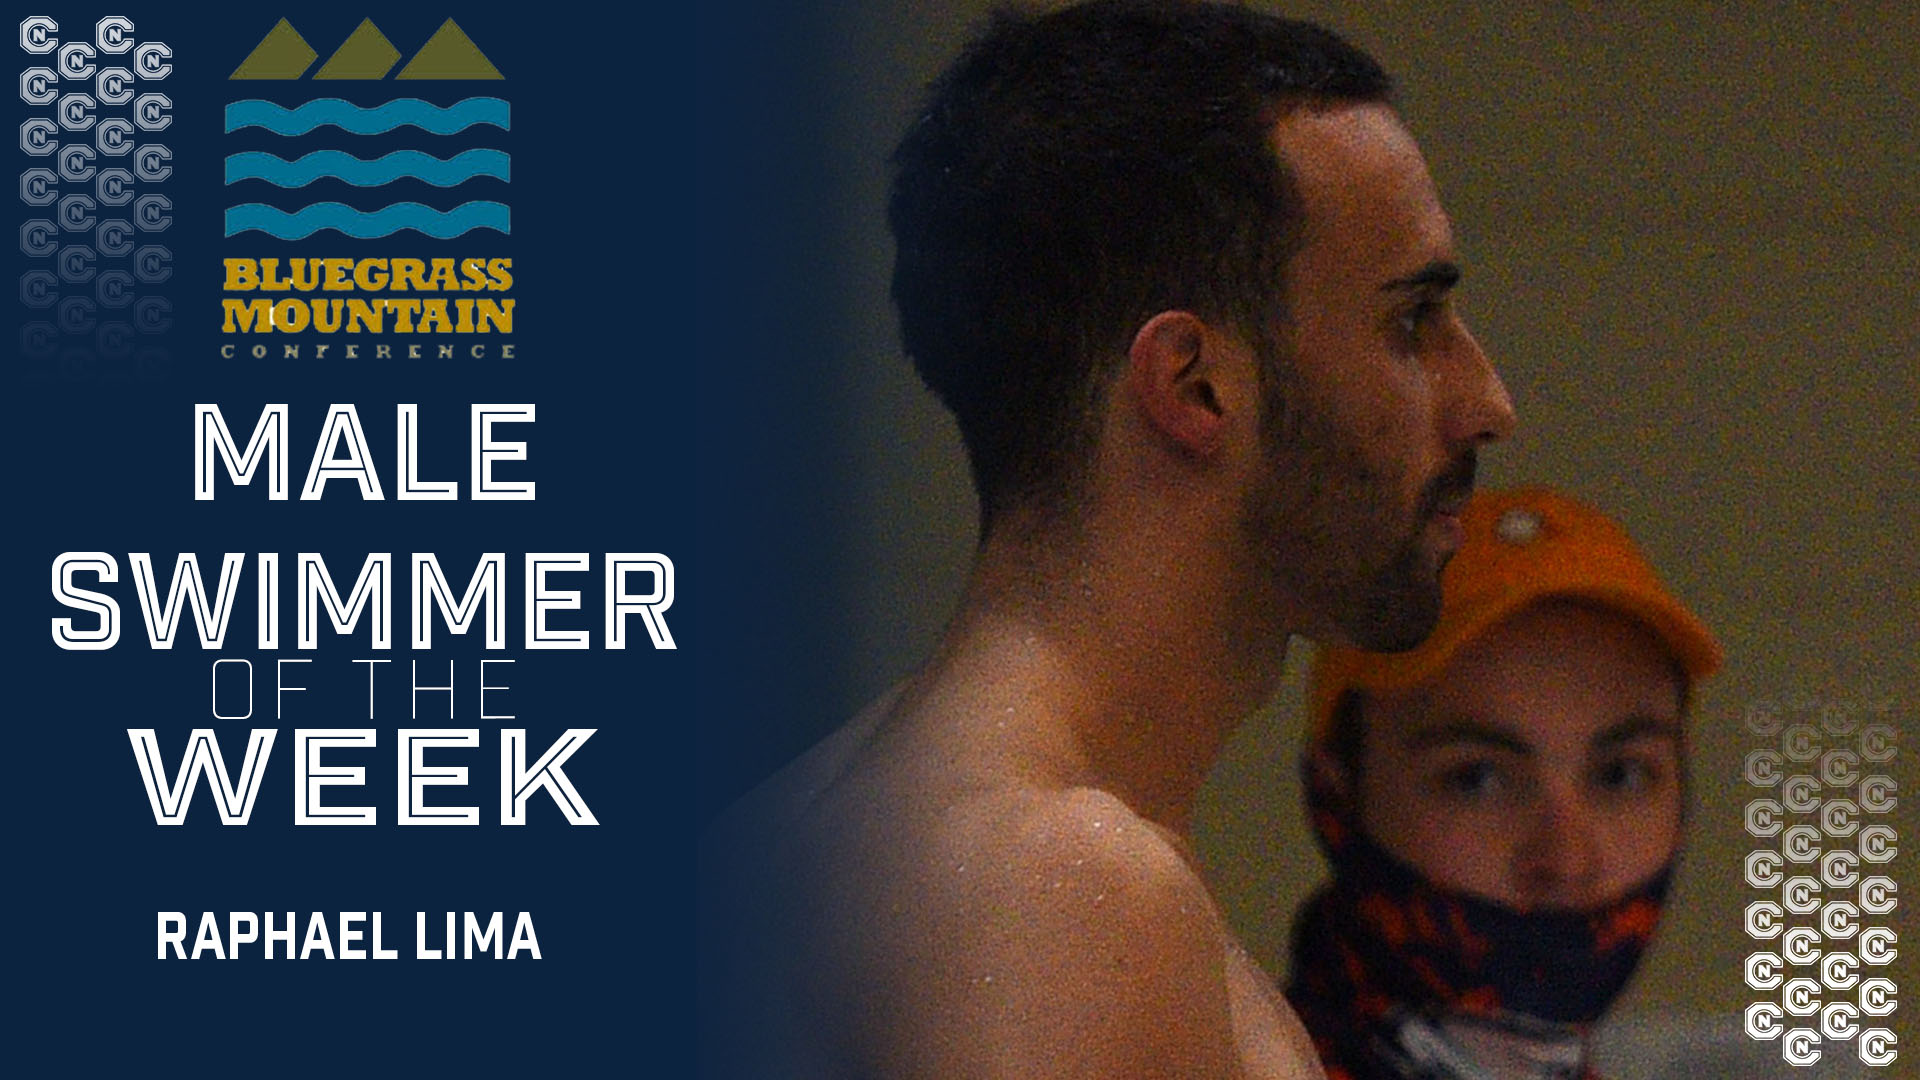 Raphael Lima named BMC Male Swimmer of the Week